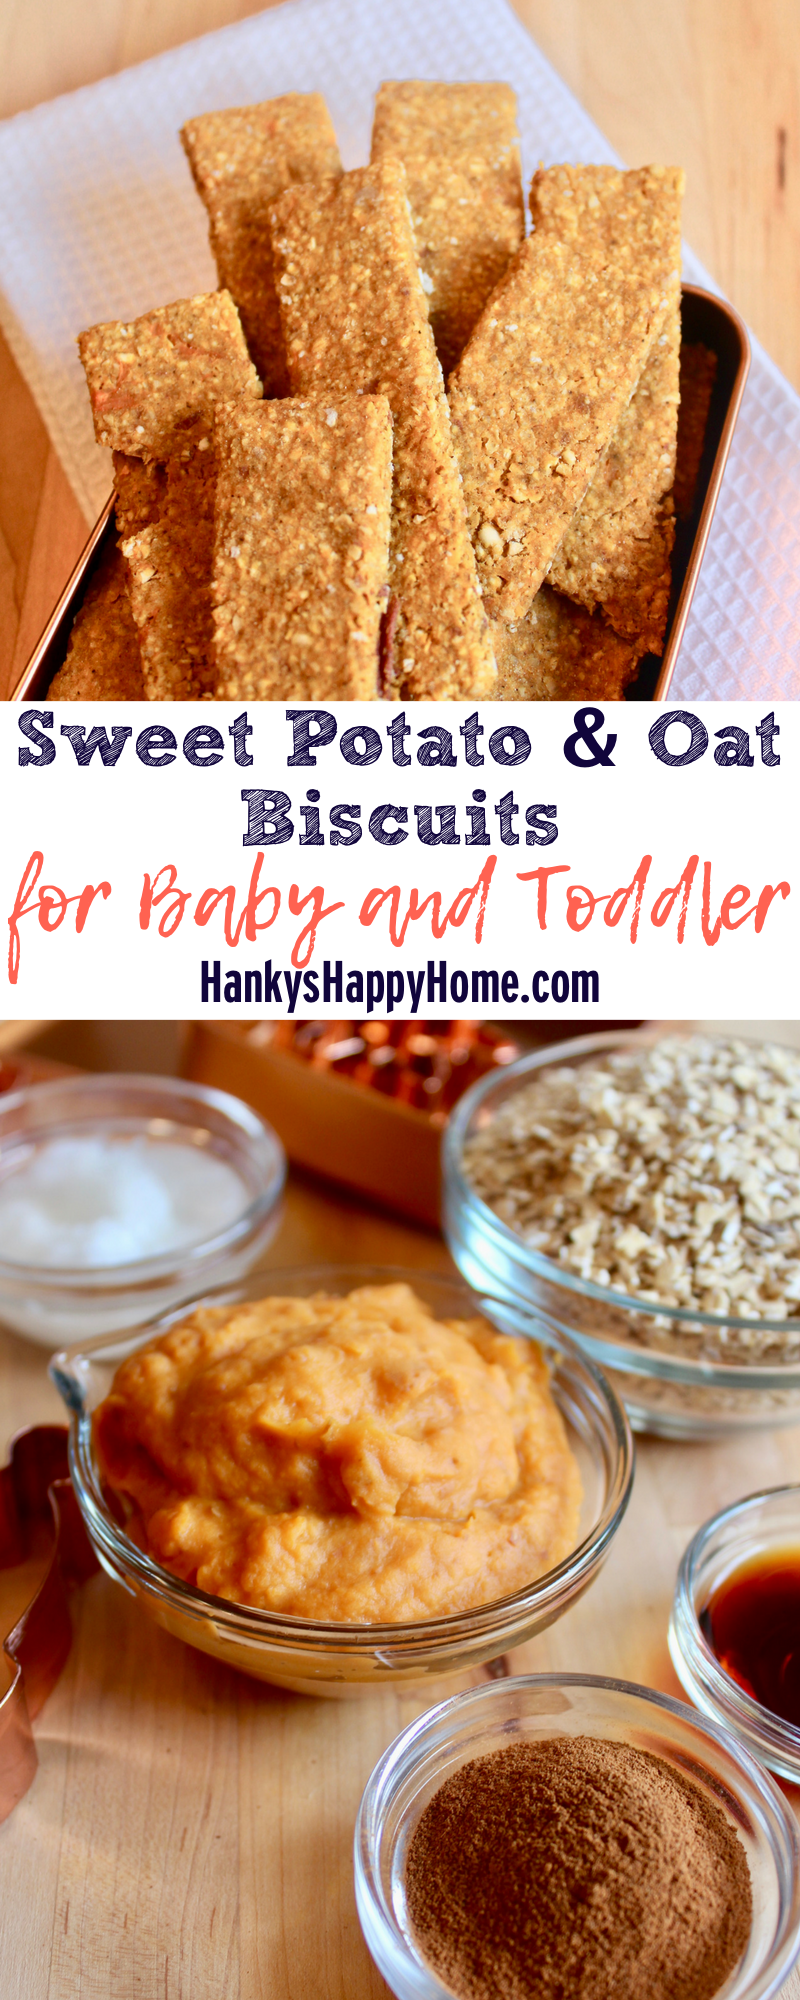 These Sweet Potato & Oat Biscuits combine yummy sweet potatoes with hearty oats. Make them as easy finger food or a homemade teething biscuit.